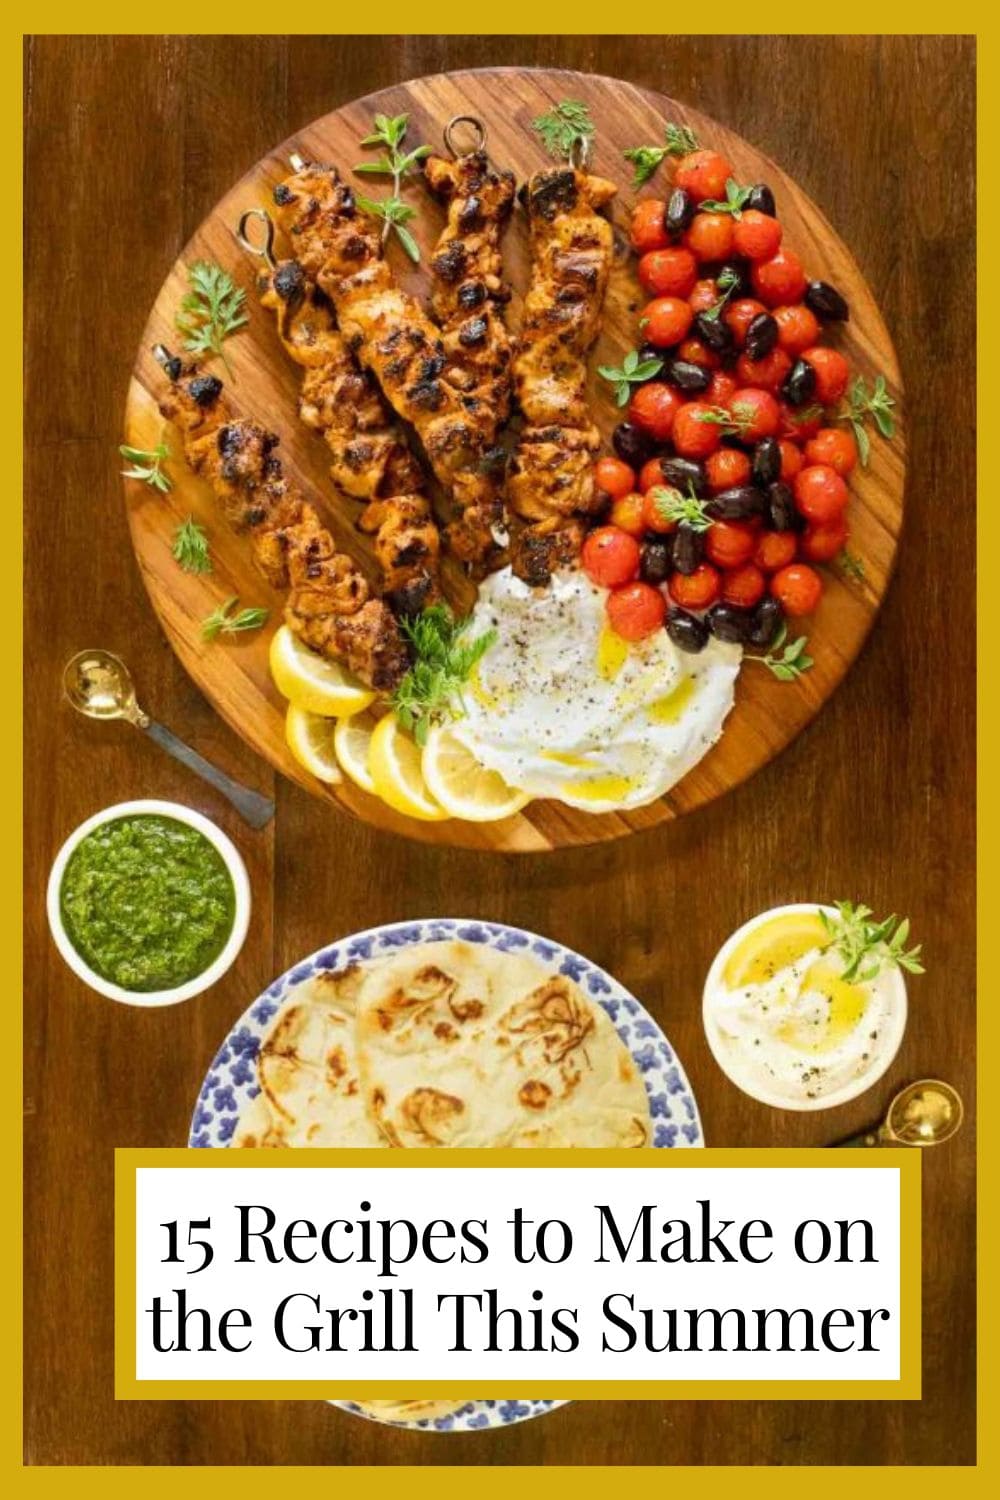 15 Delicious Must-Make Grilling Recipes!